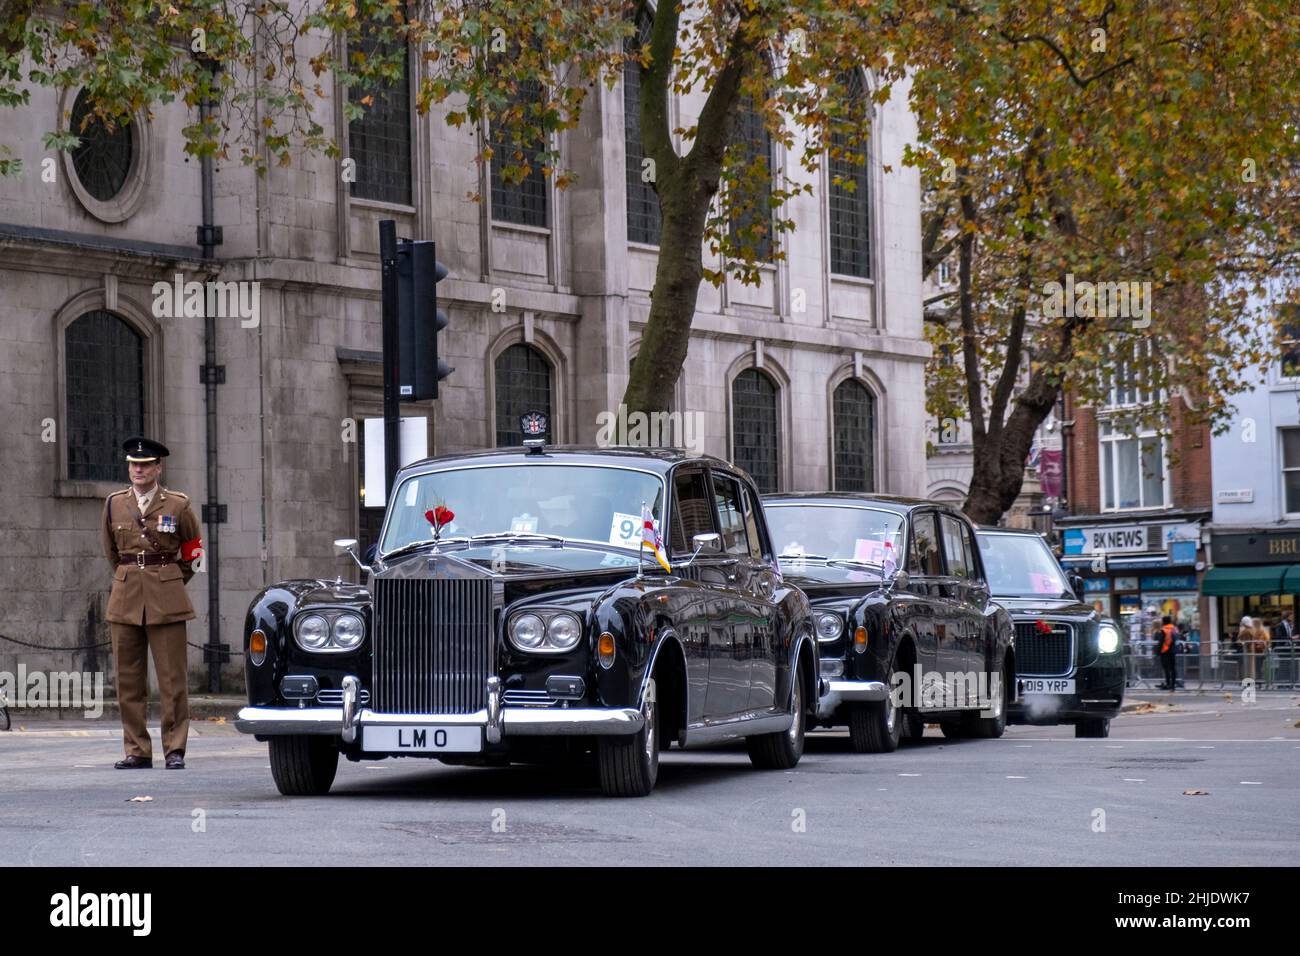 Rolls Royce limousine cars at the Lord Mayor's Show 2021, City of London, London, UK Stock Photo